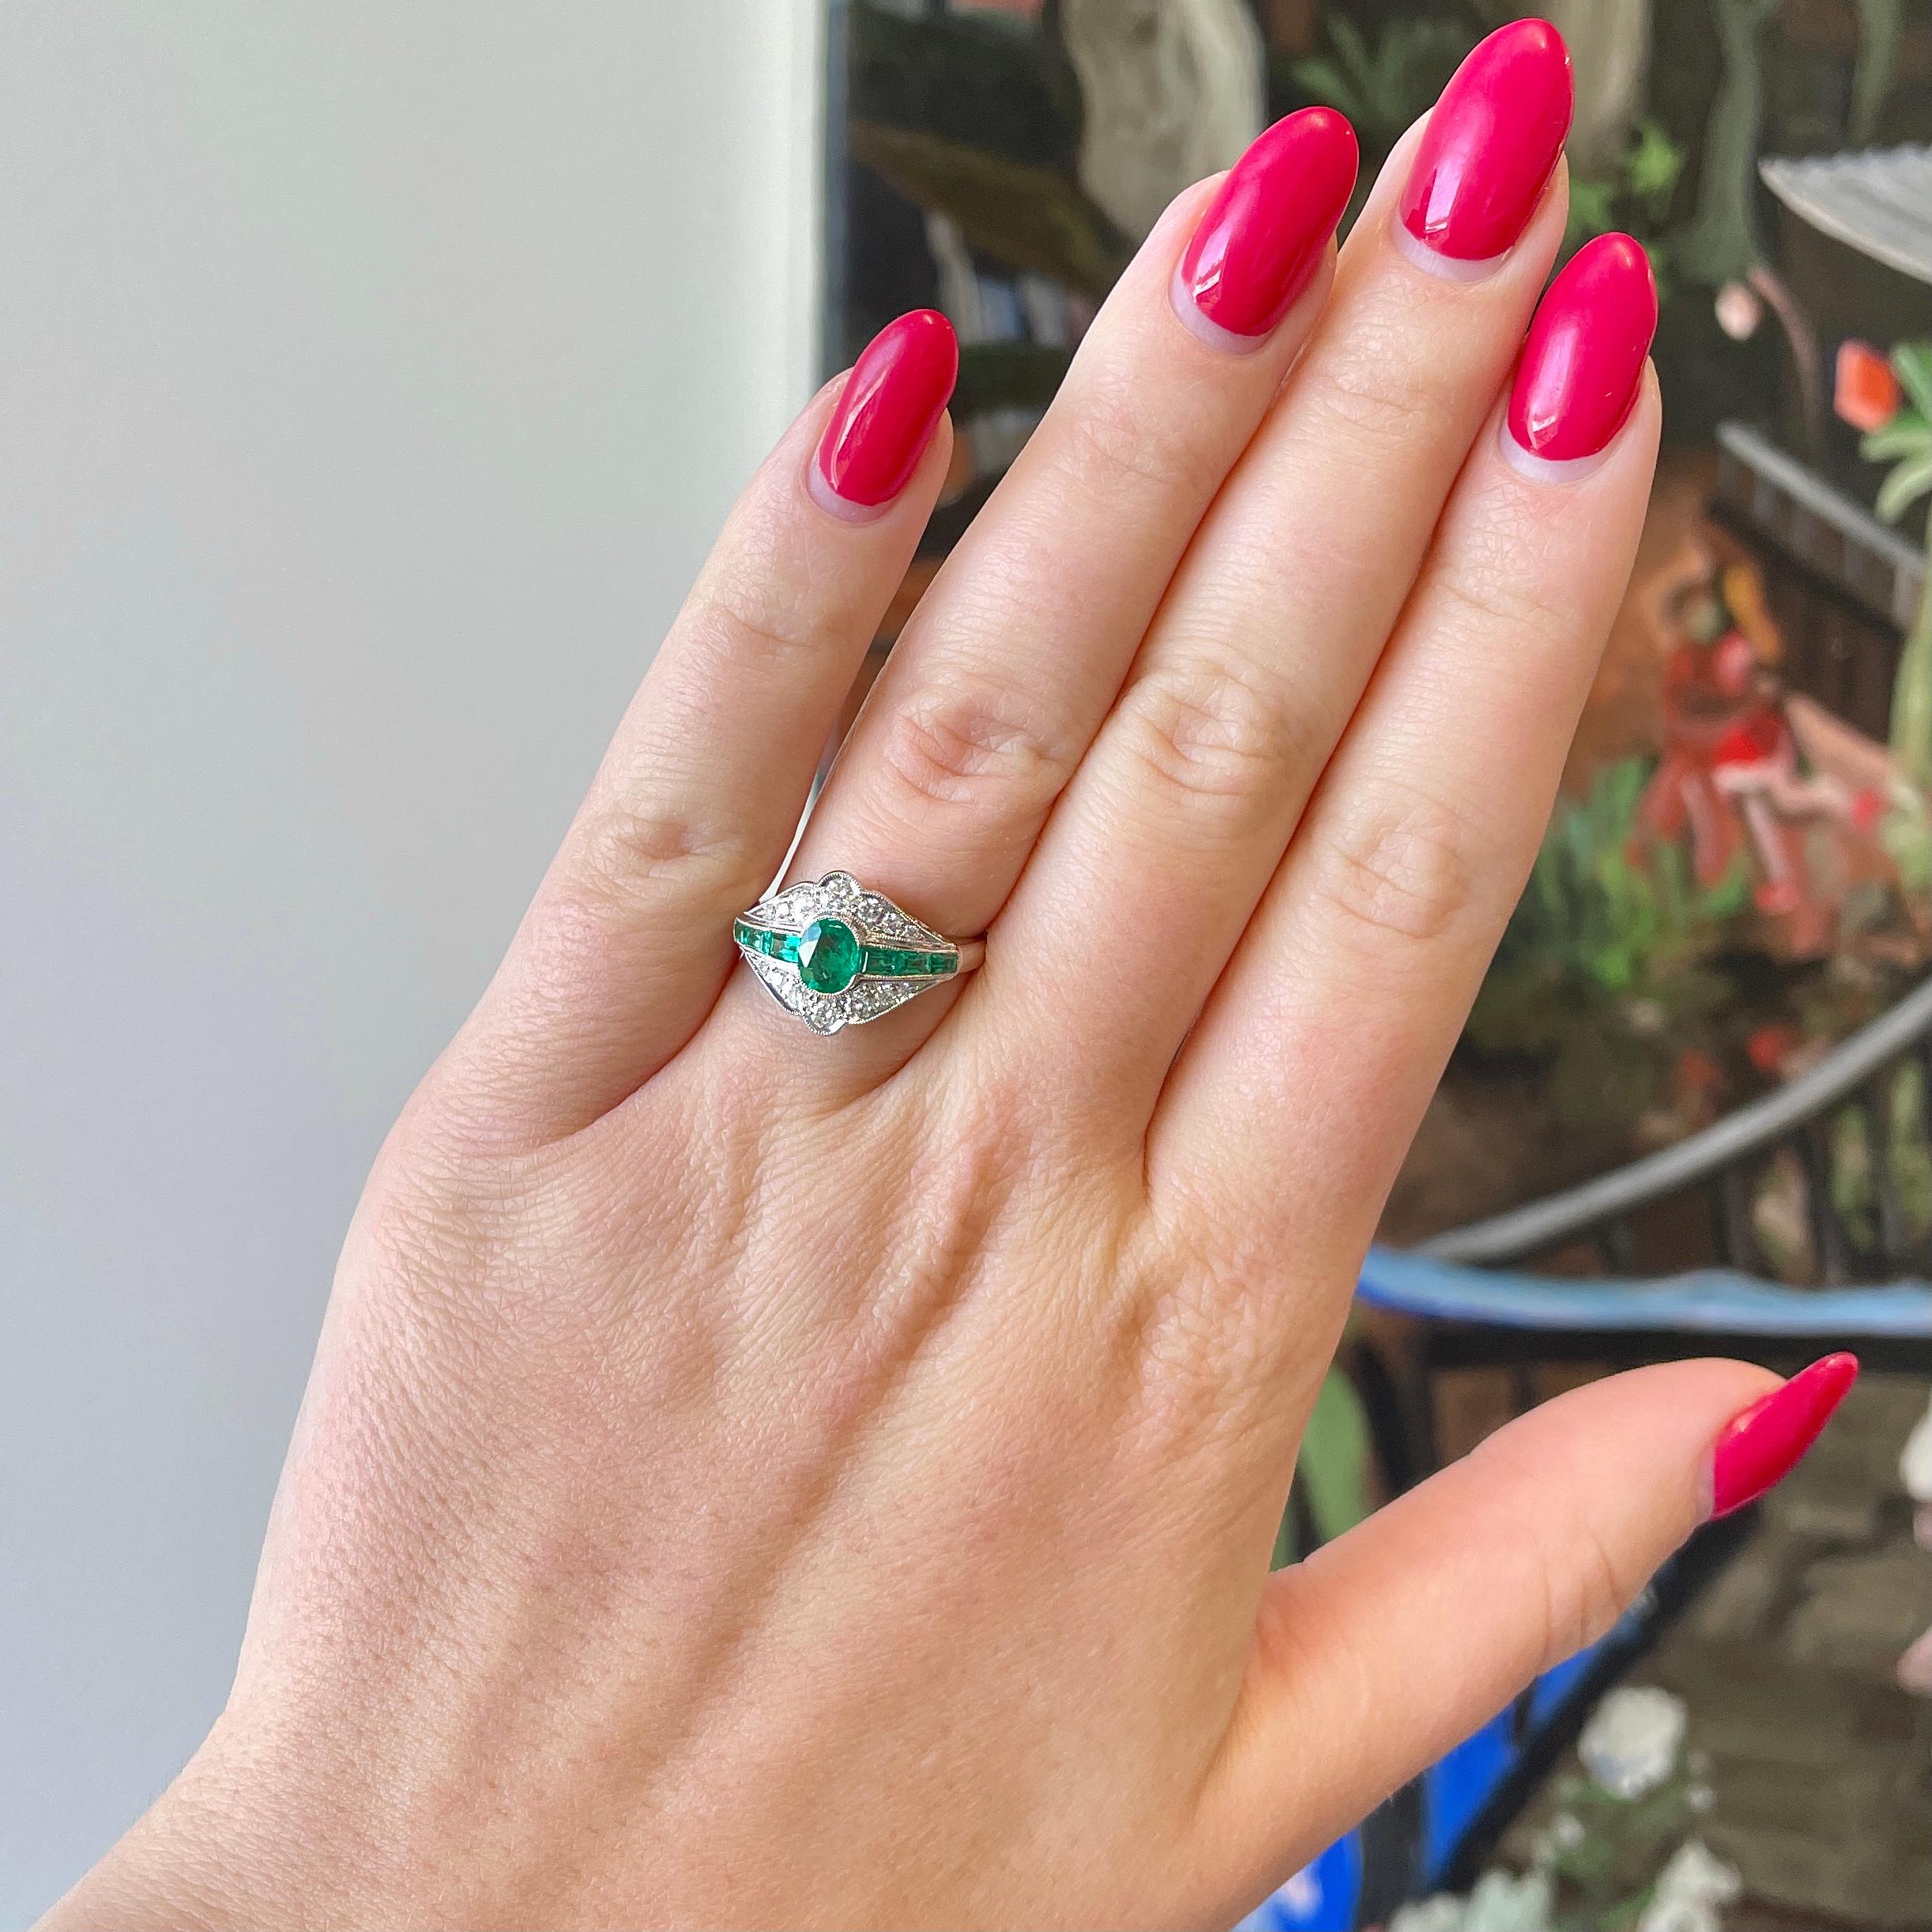 Art Deco Style, aka the Roaring 20s are known for endless parties and dancing, strong cocktails and lavish lifestyle. The jewelry from this period truly reflect the iconic era. This Vintage Art Deco Style Emerald Diamond 18k White Gold Ring is an